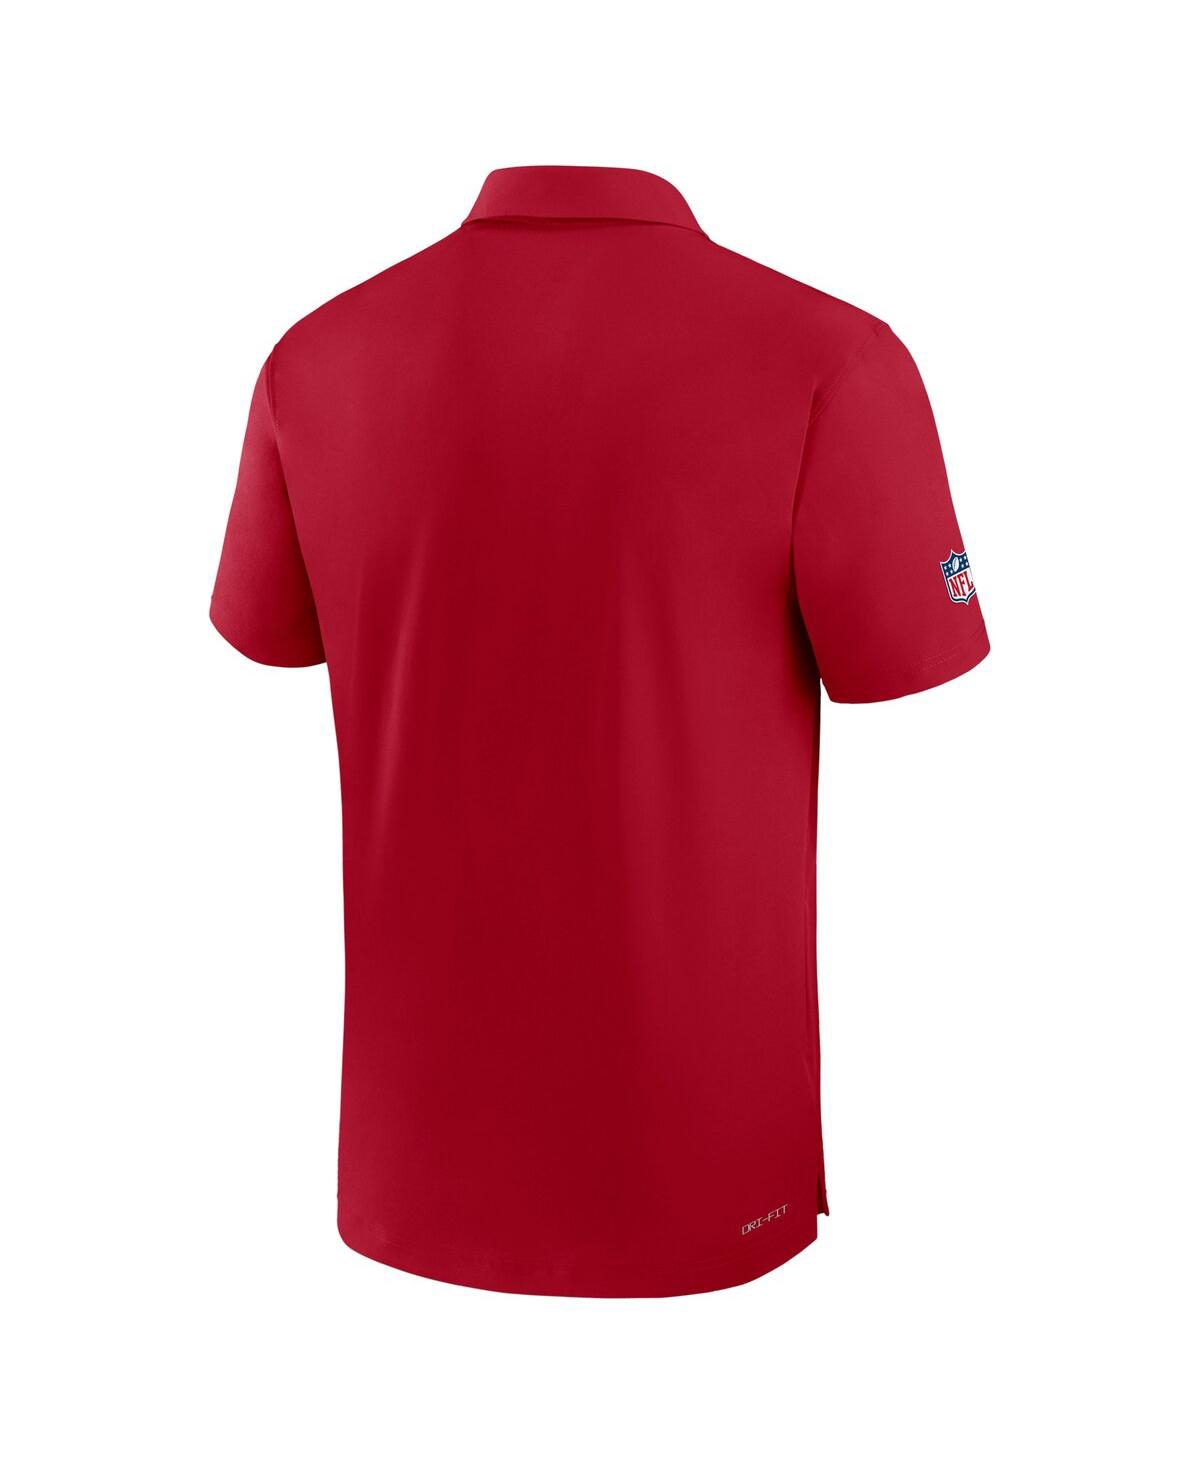 Shop Nike Men's  Red Tampa Bay Buccaneers Sideline Coaches Performance Polo Shirt